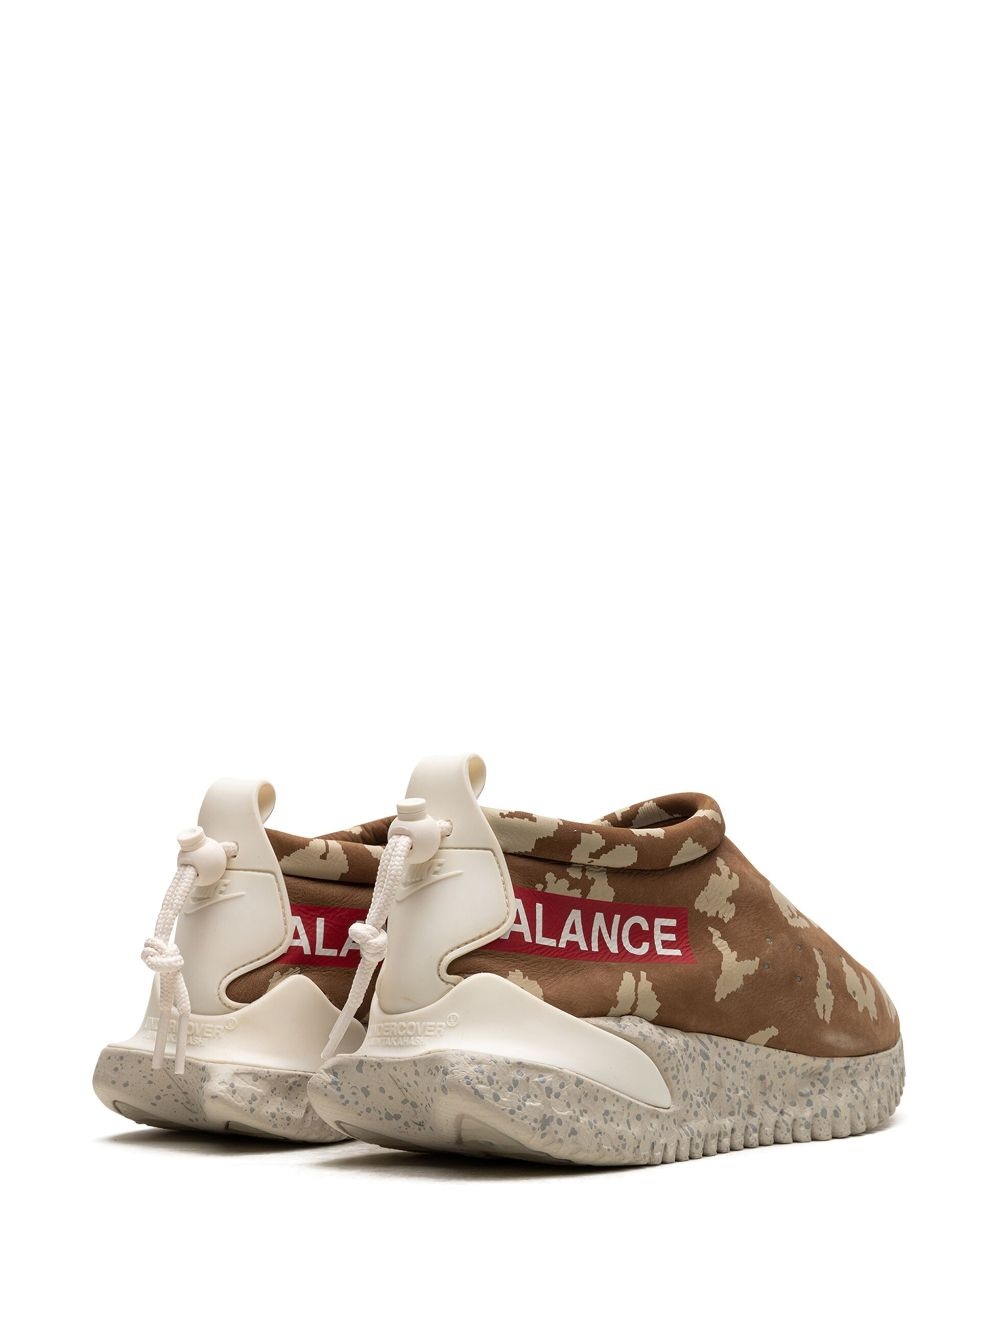 x UNDERCOVER Moc Flow "Ale Brown" sneakers - 3